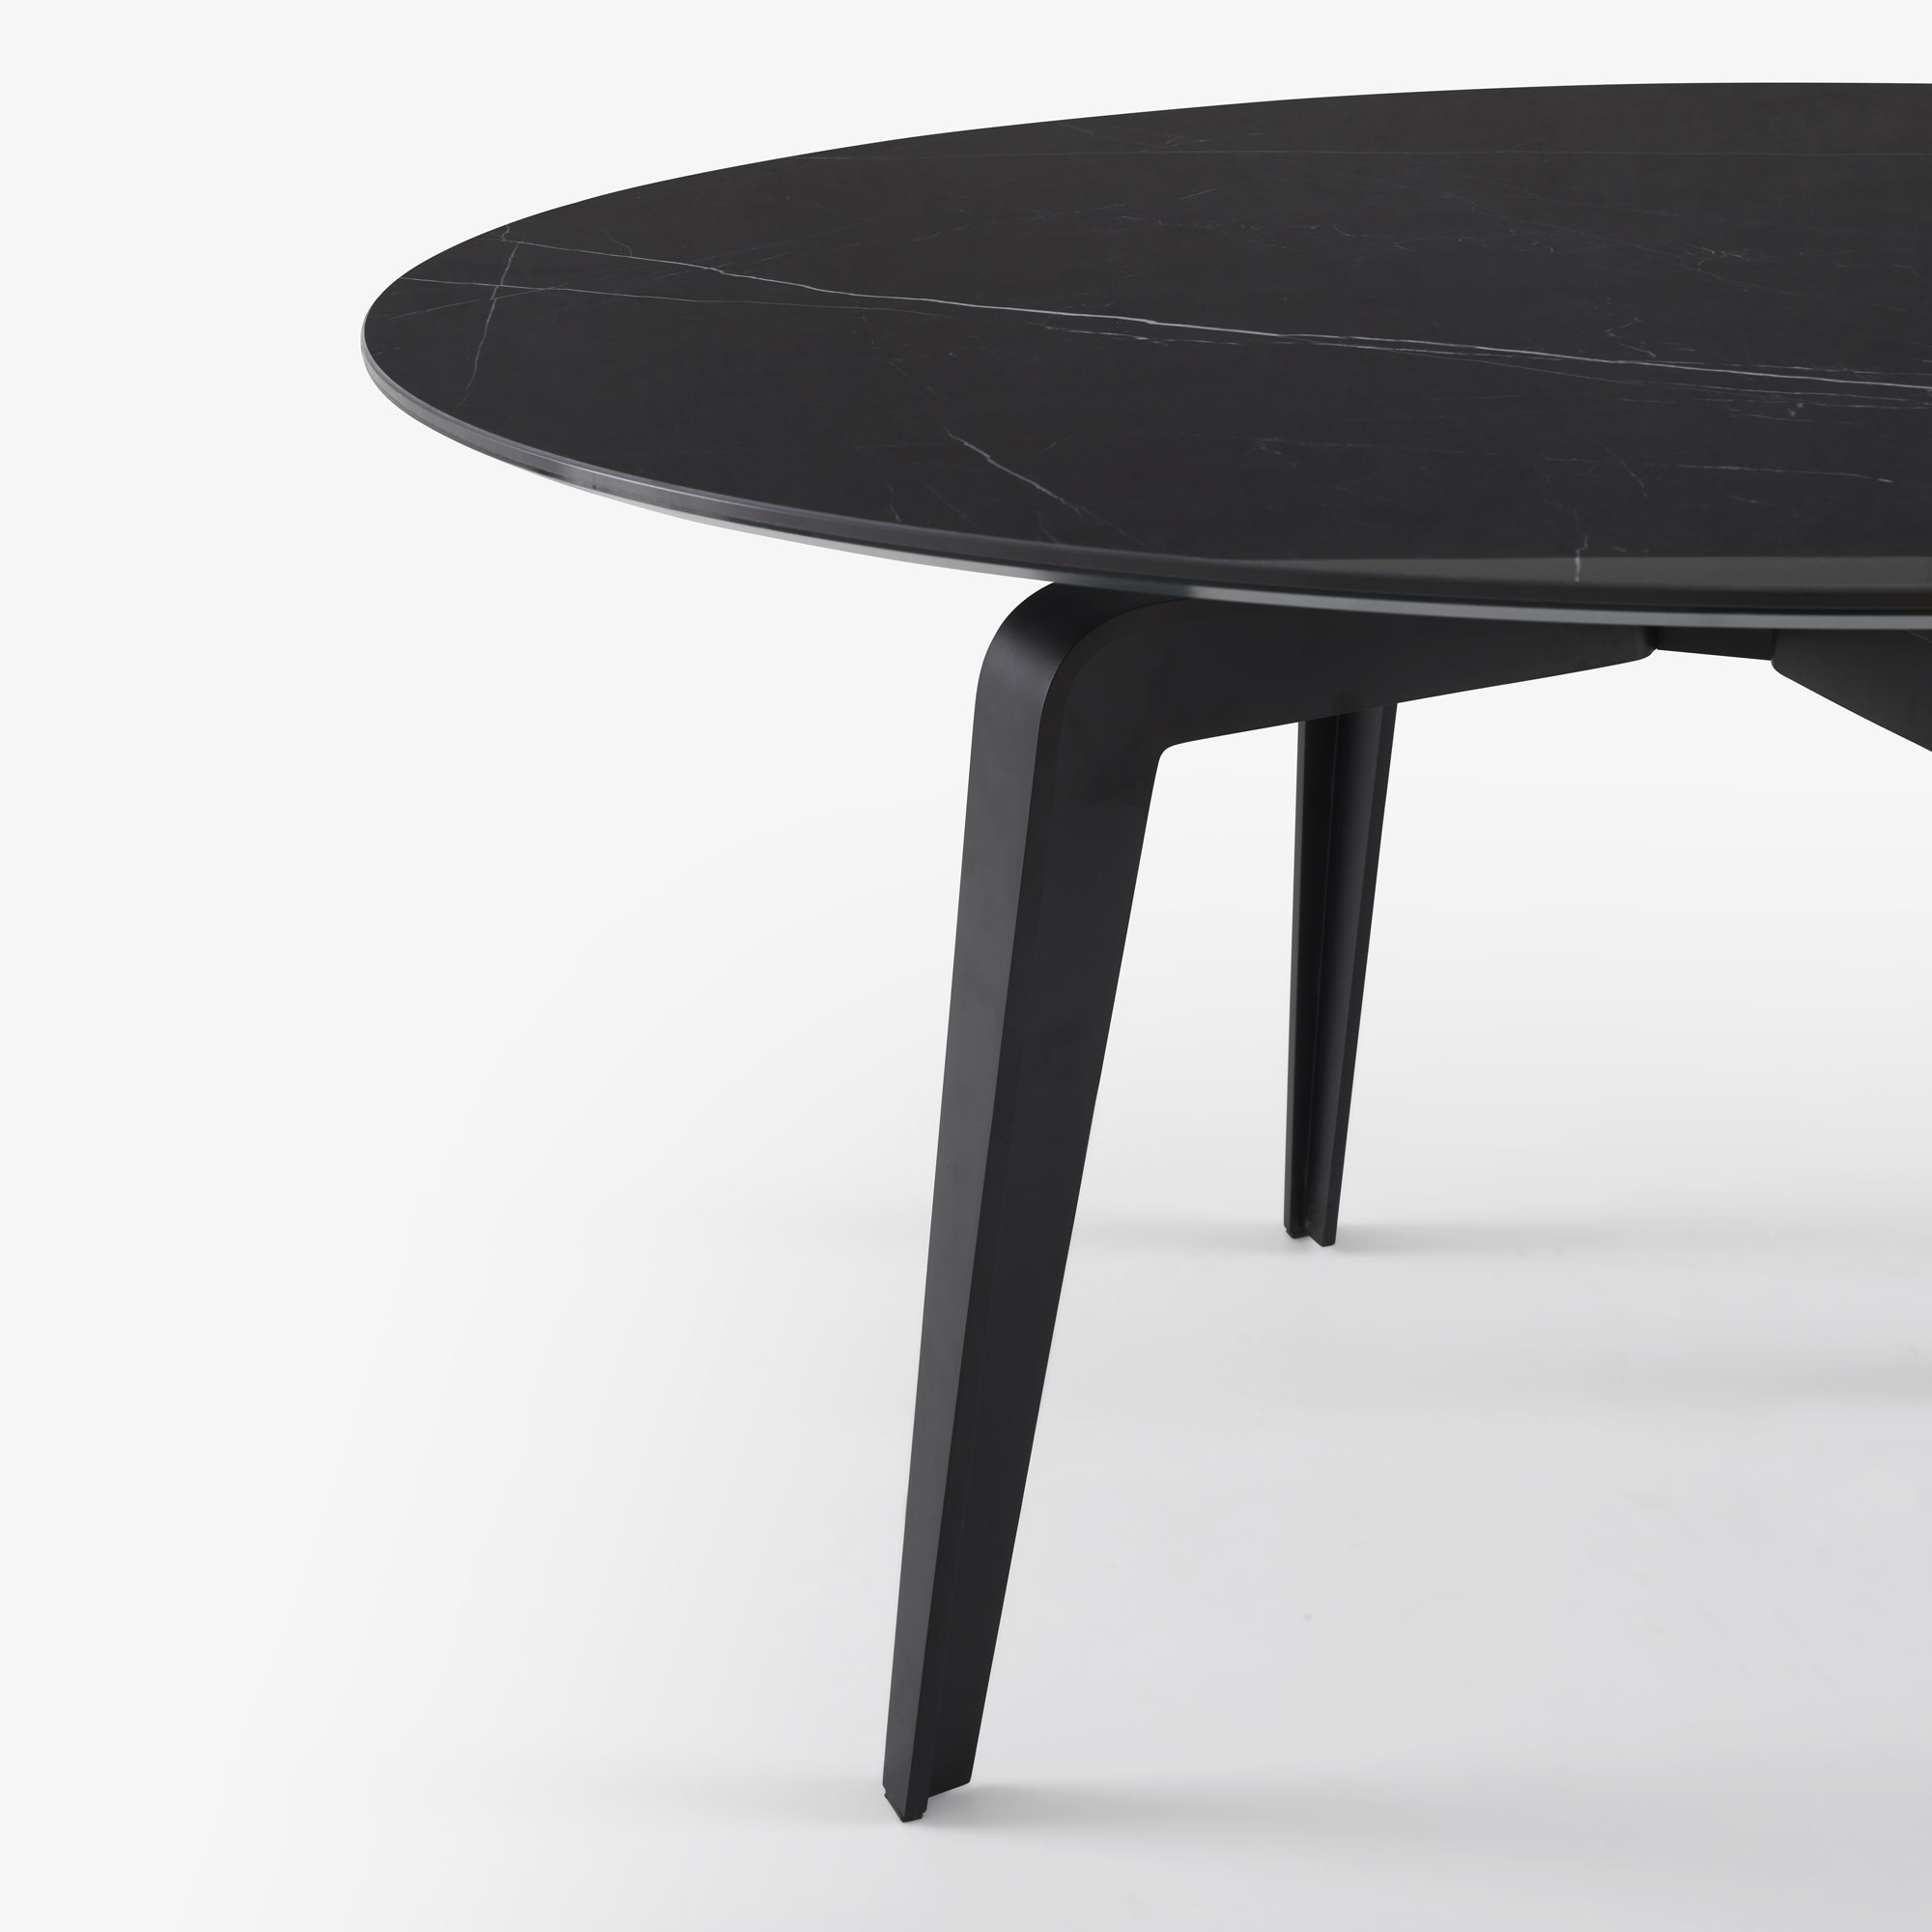 Image Round dining table black lacquered base  3